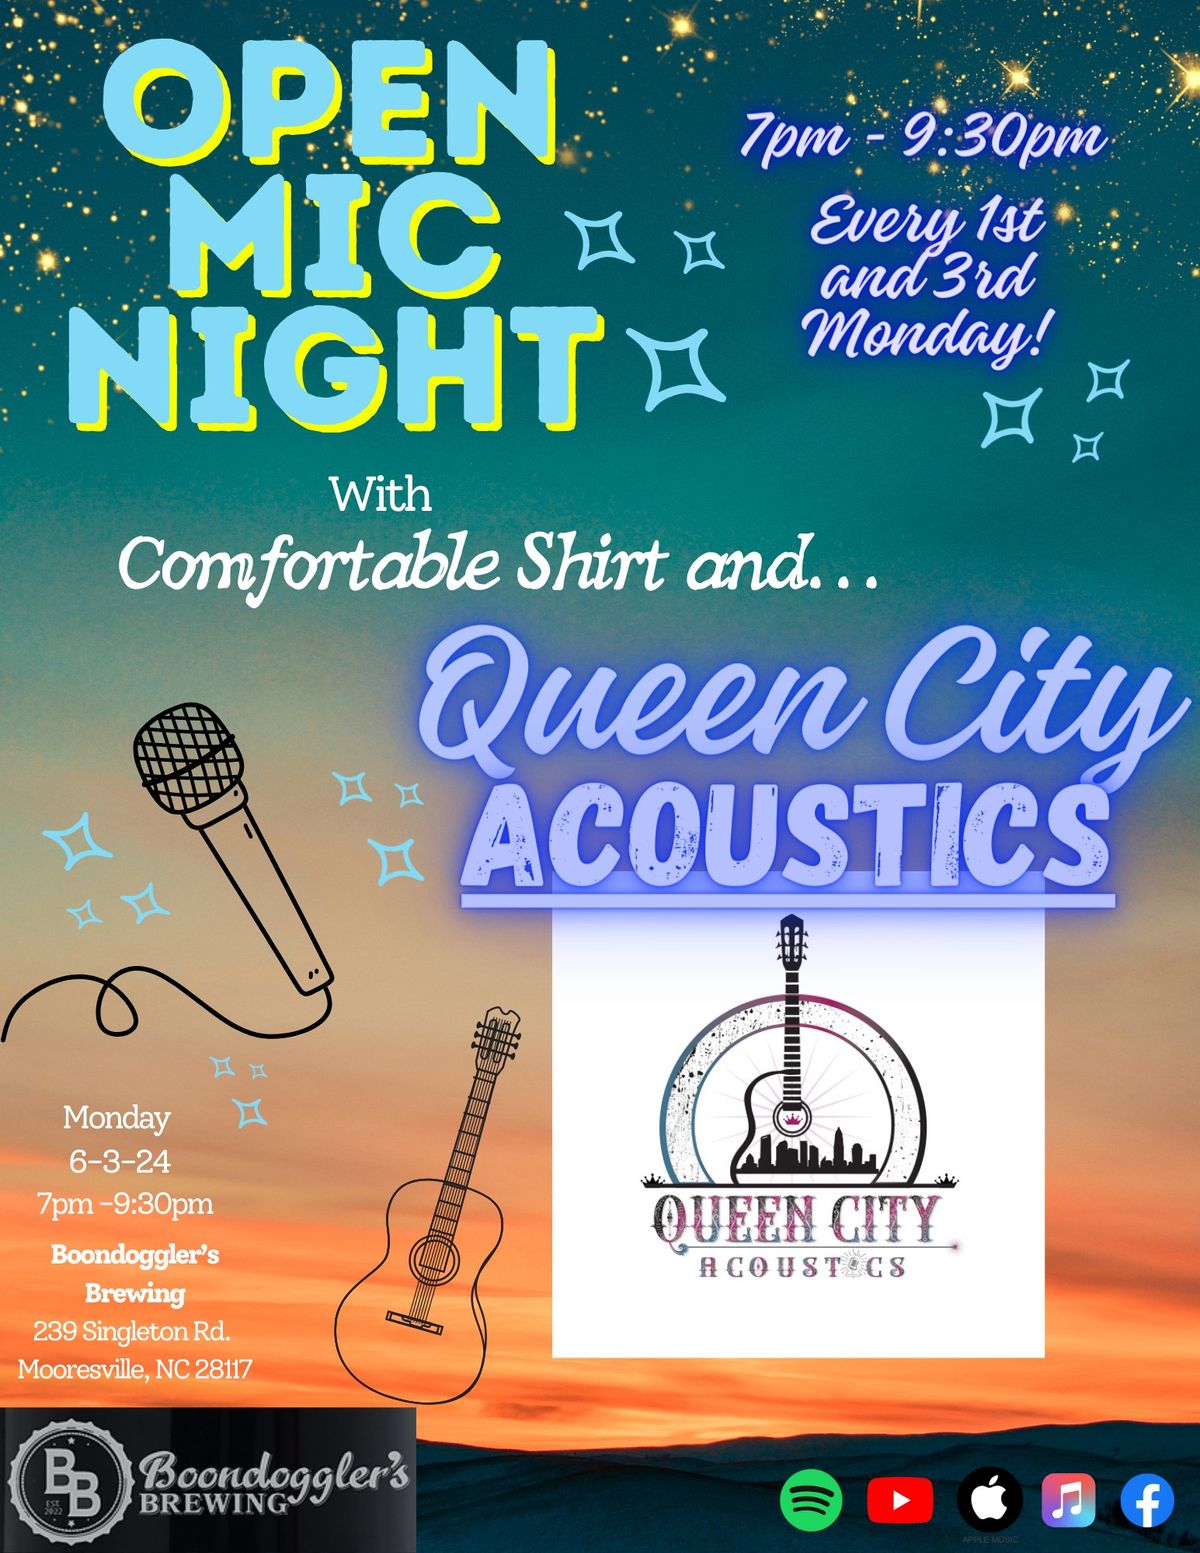 Open Mic at Boondoggler's Brewing: Featuring Queen City Acoustics!